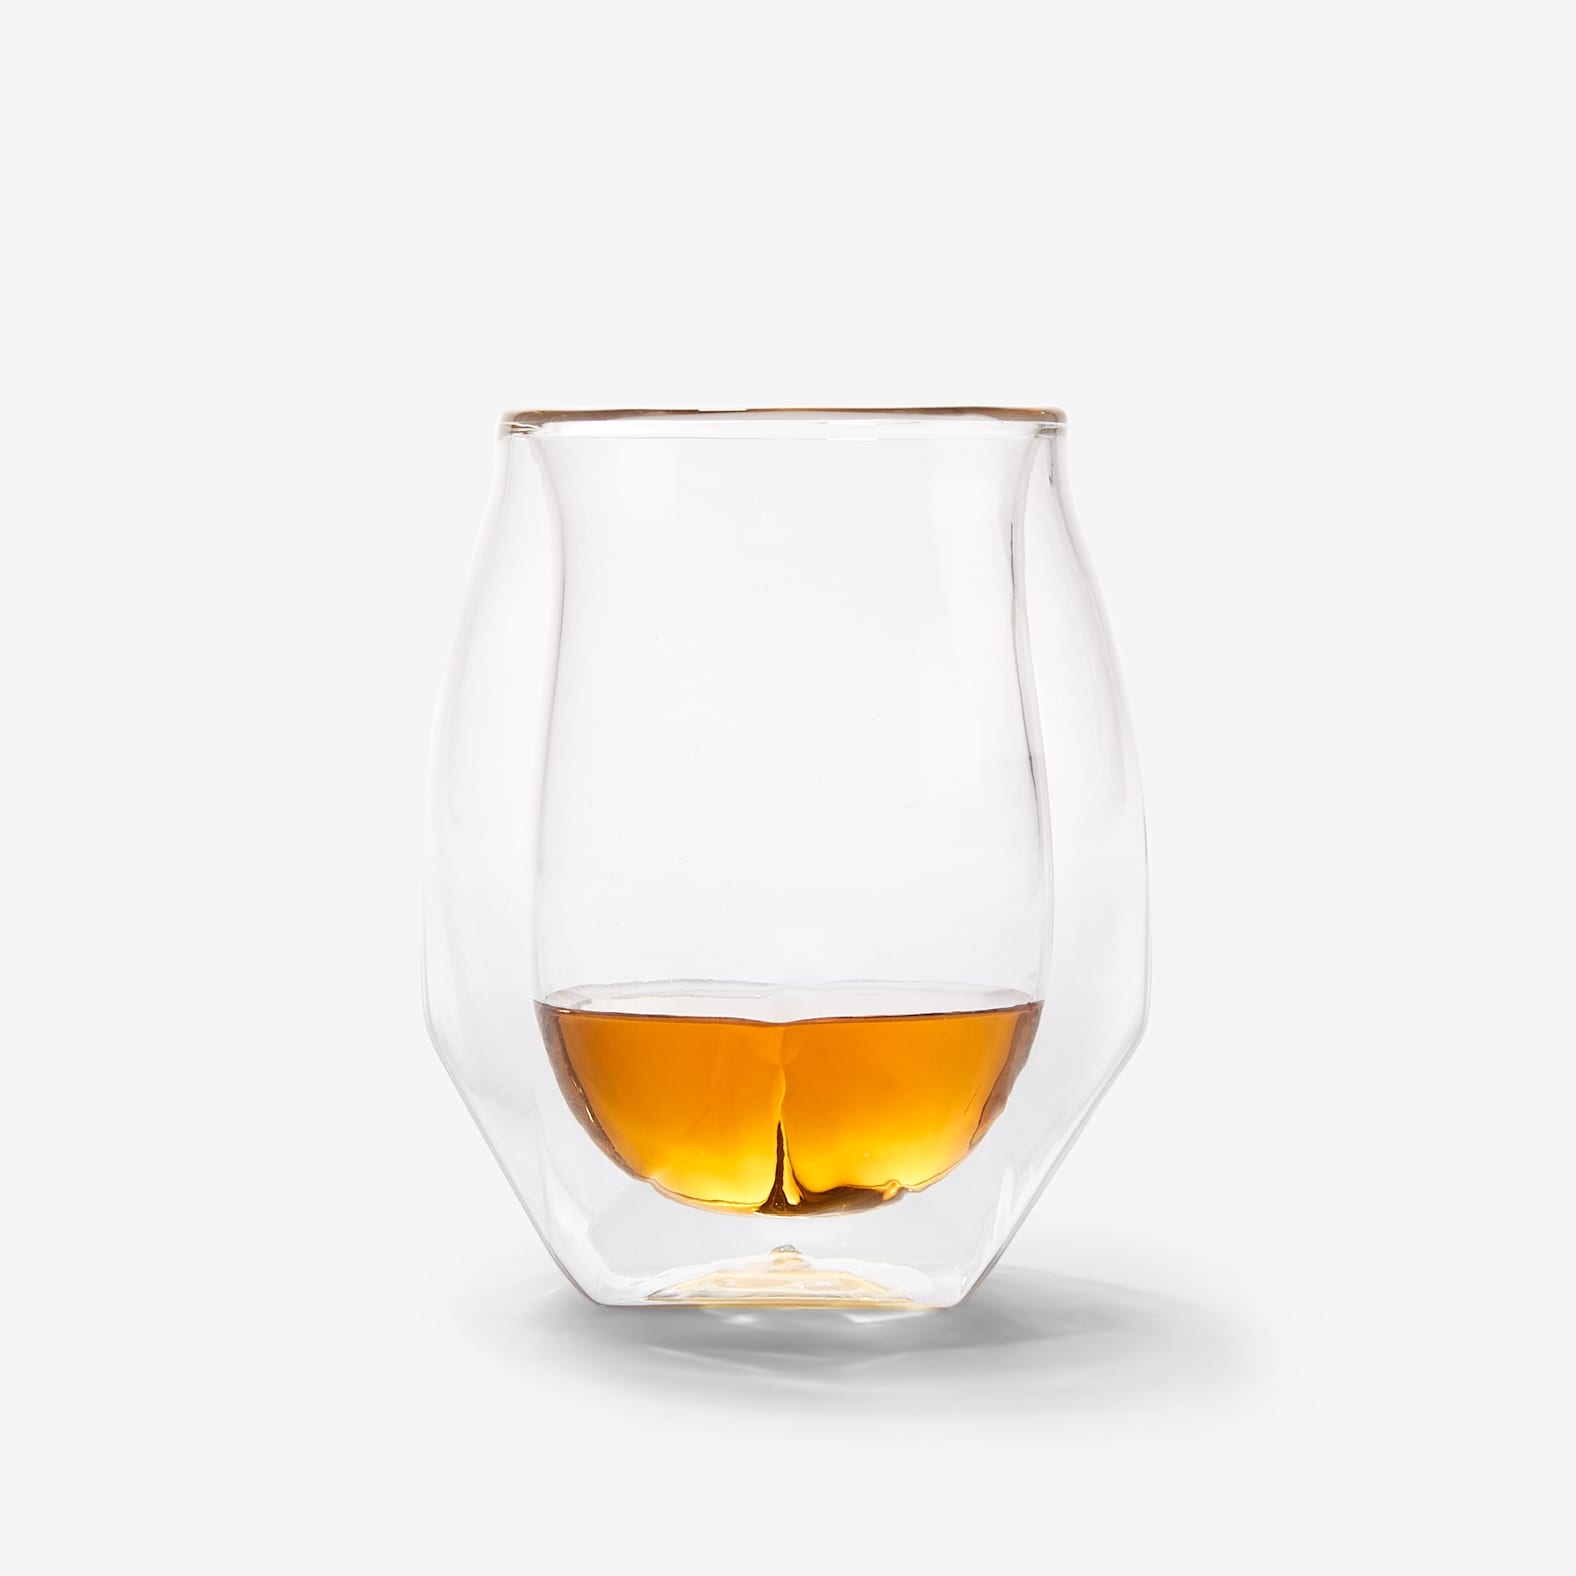 Norlan Glass Norlan Whisky Glasses – Set of 2